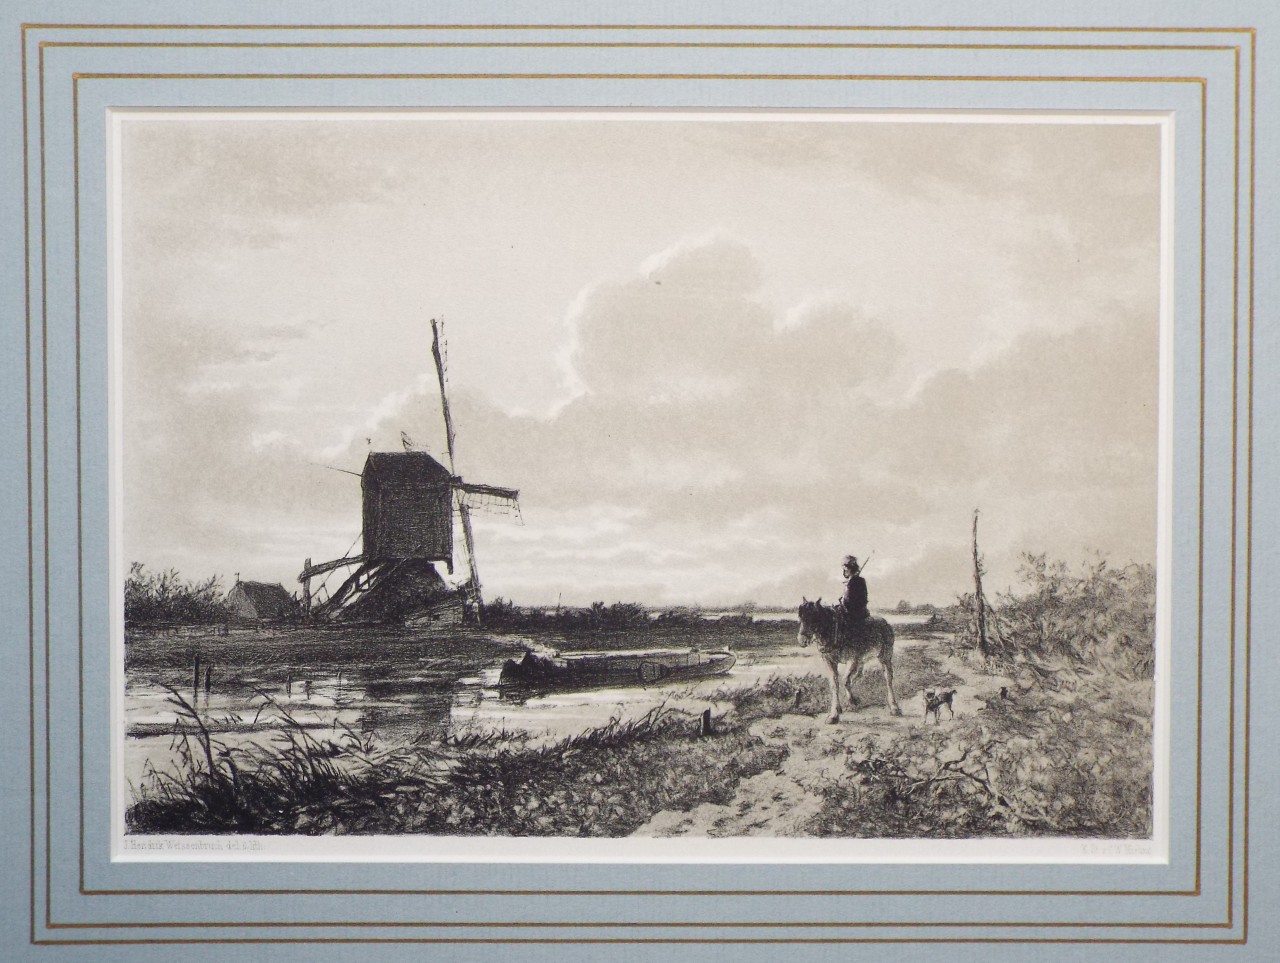 Lithograph - Landscape with windmill near The Hague - Weissenbruch